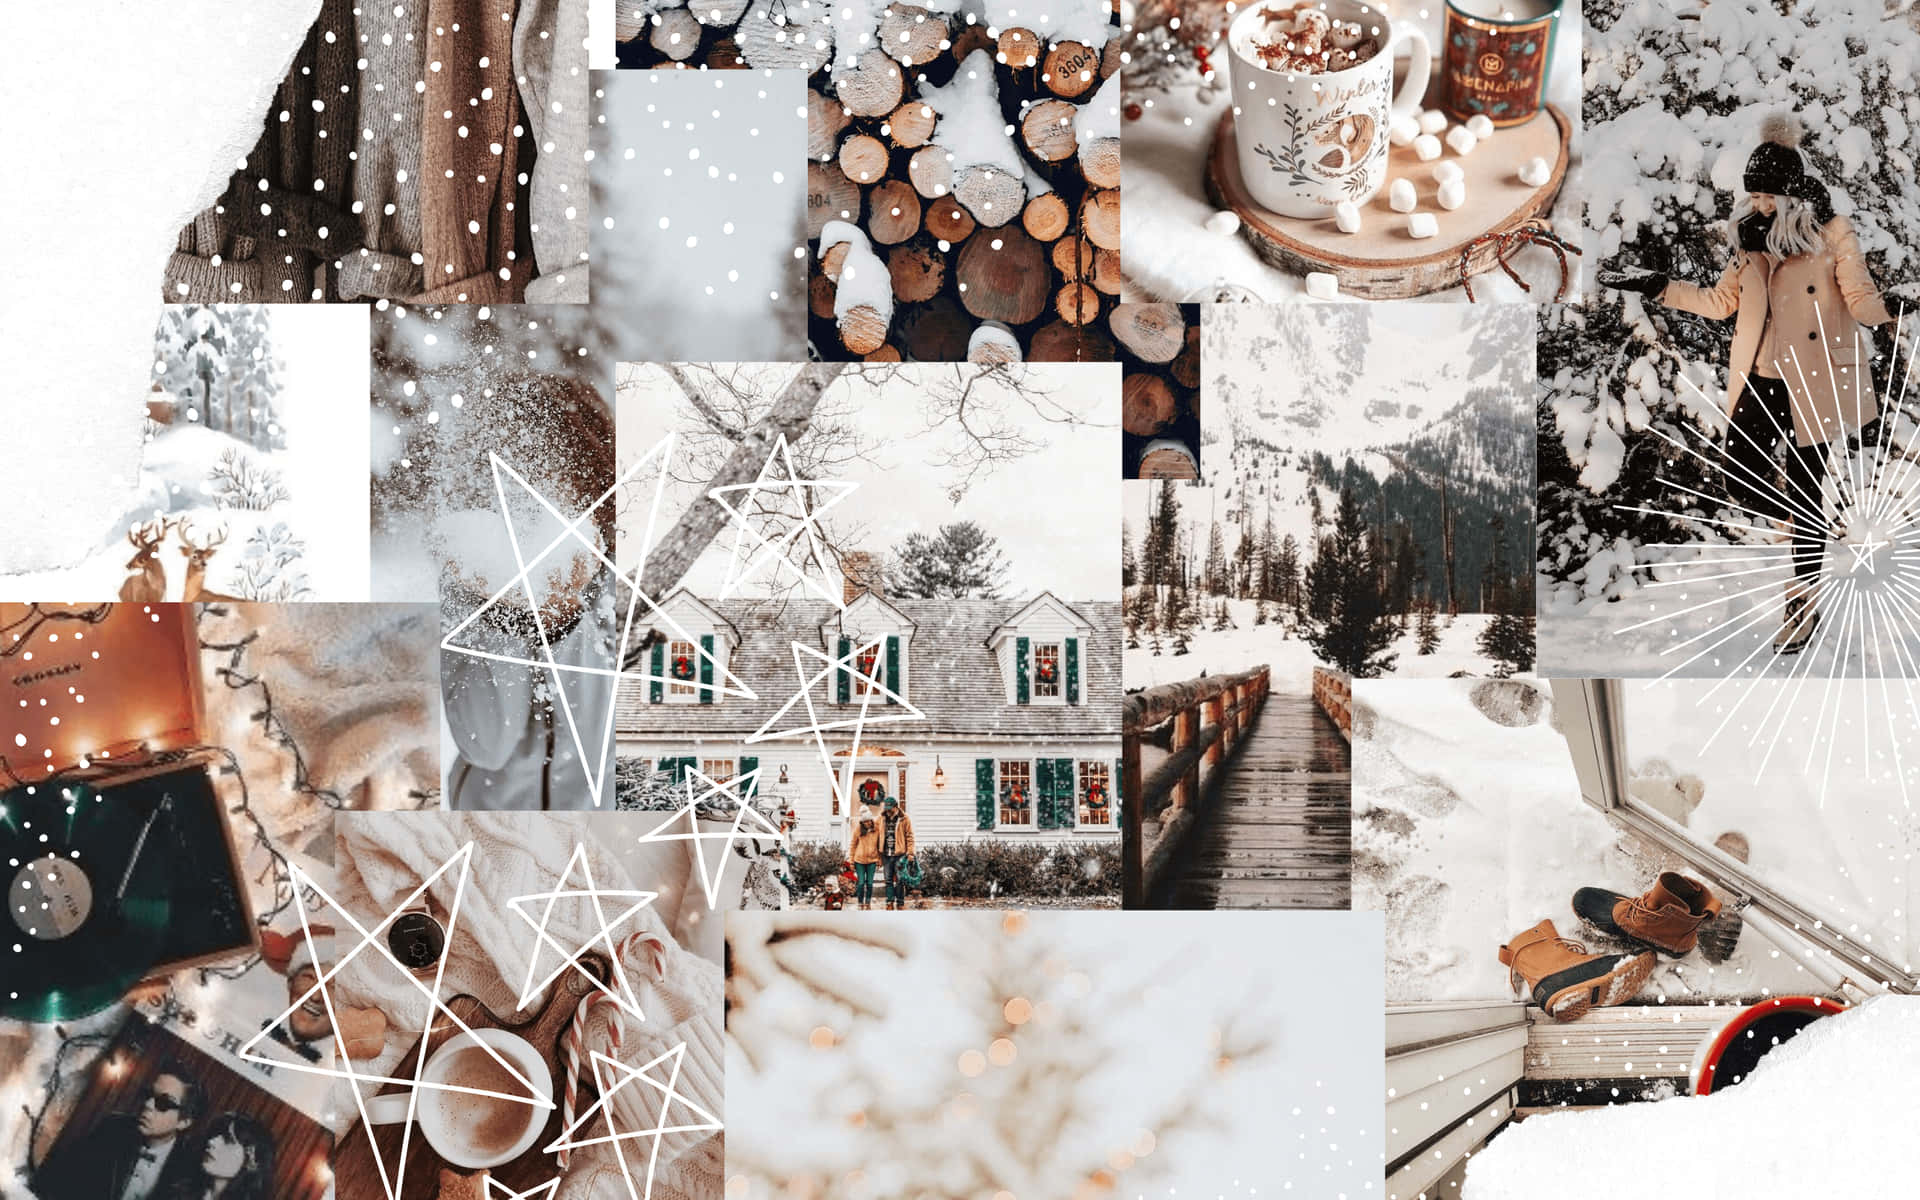 A Collage Of Photos With Snow And Snowflakes Wallpaper